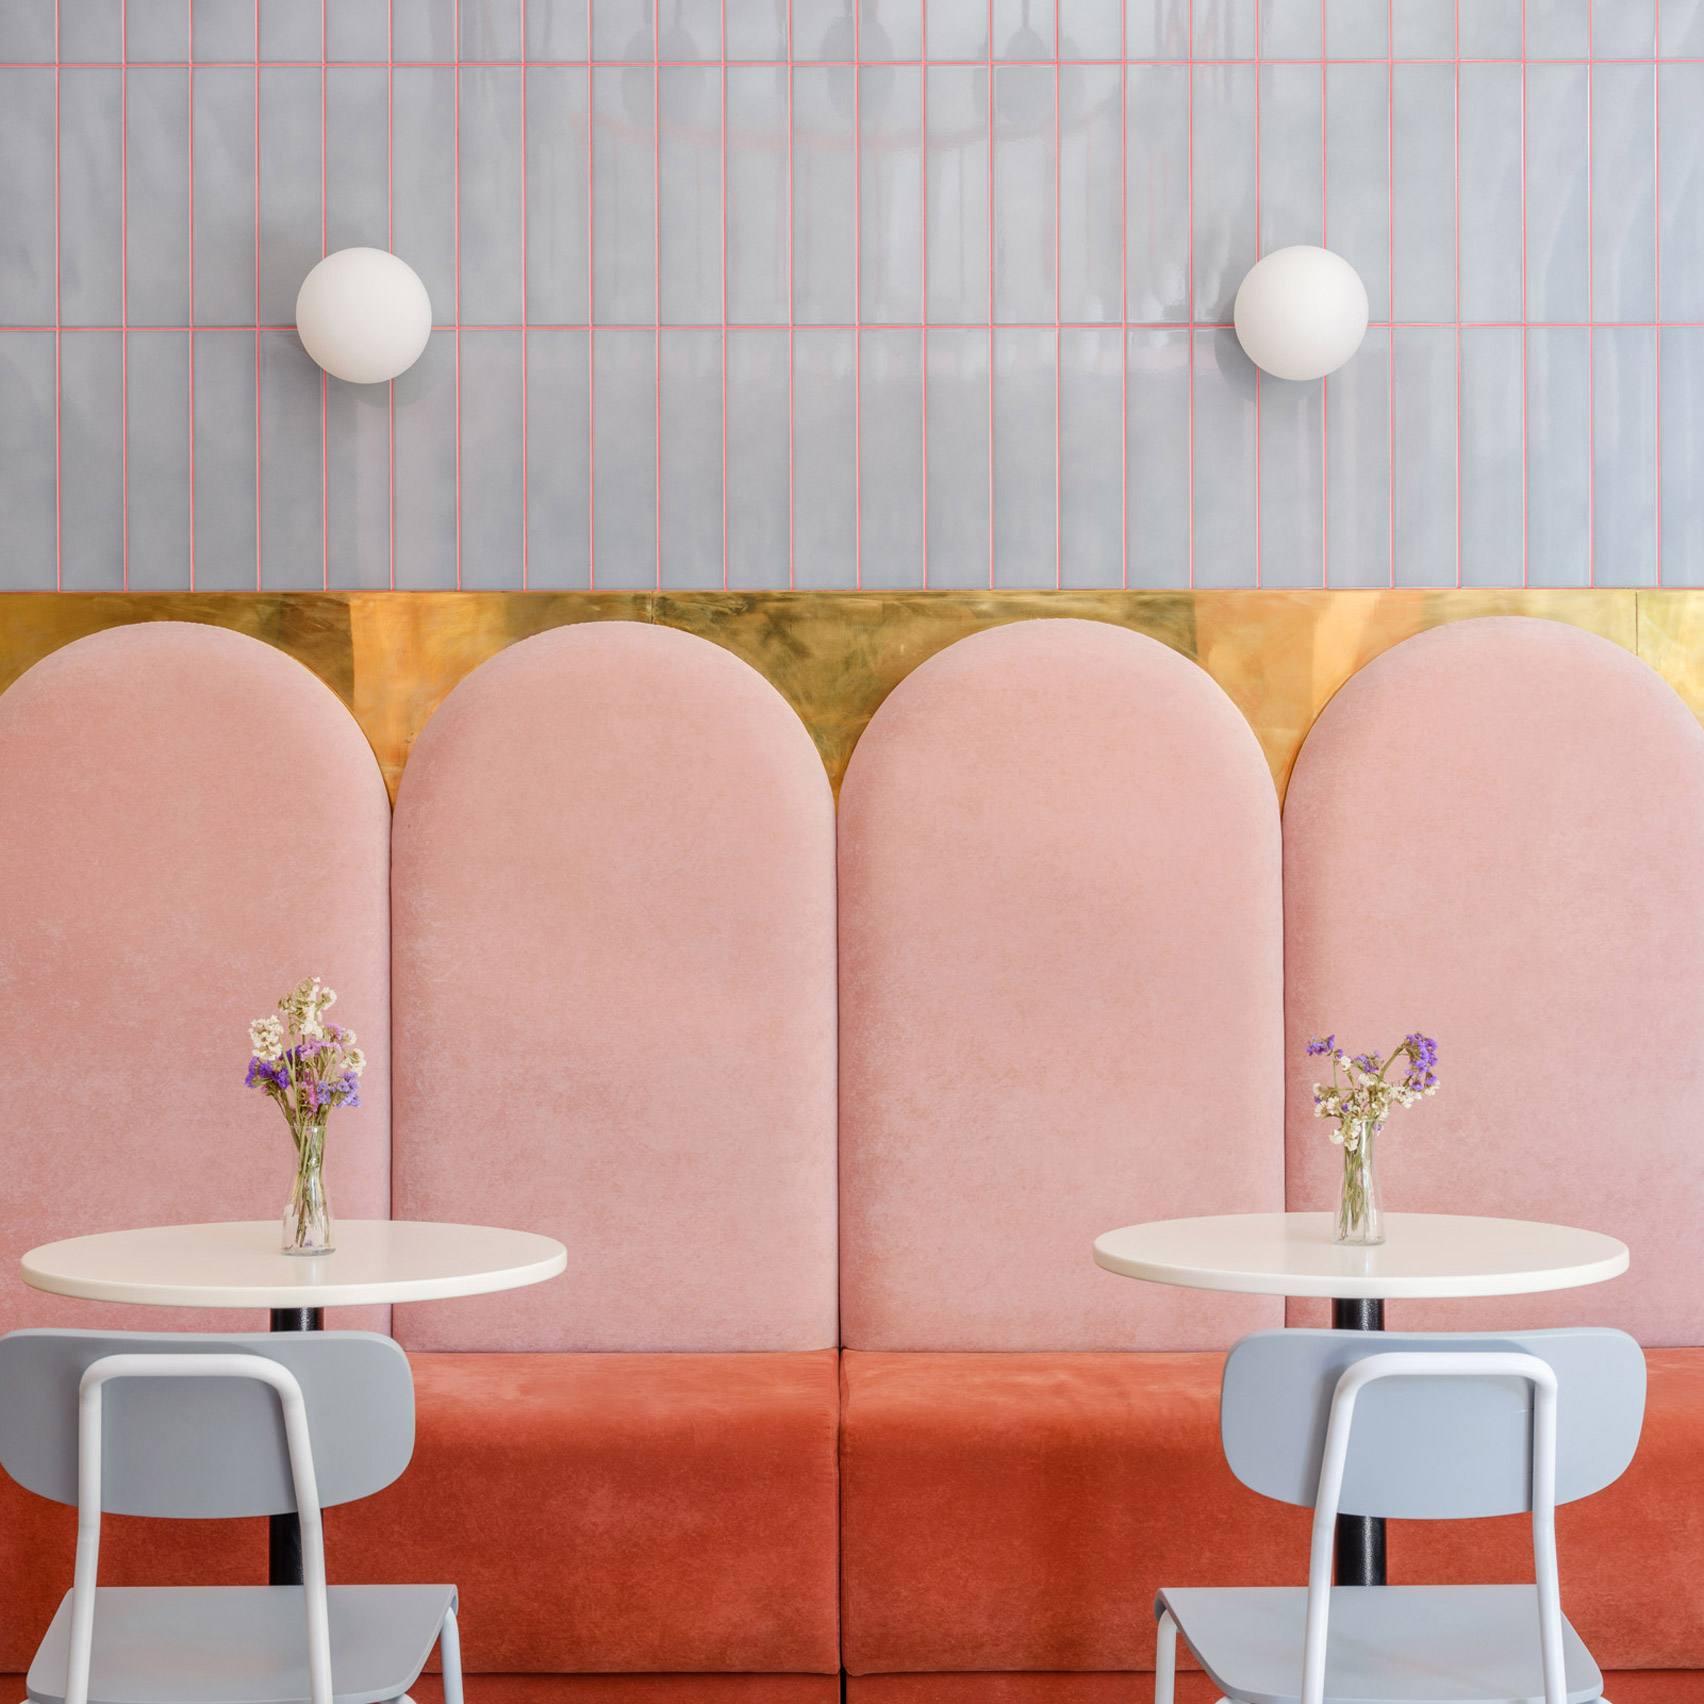 The best coral interiors: Breadway bakery by Lera Brumina and Artem Trigubchak